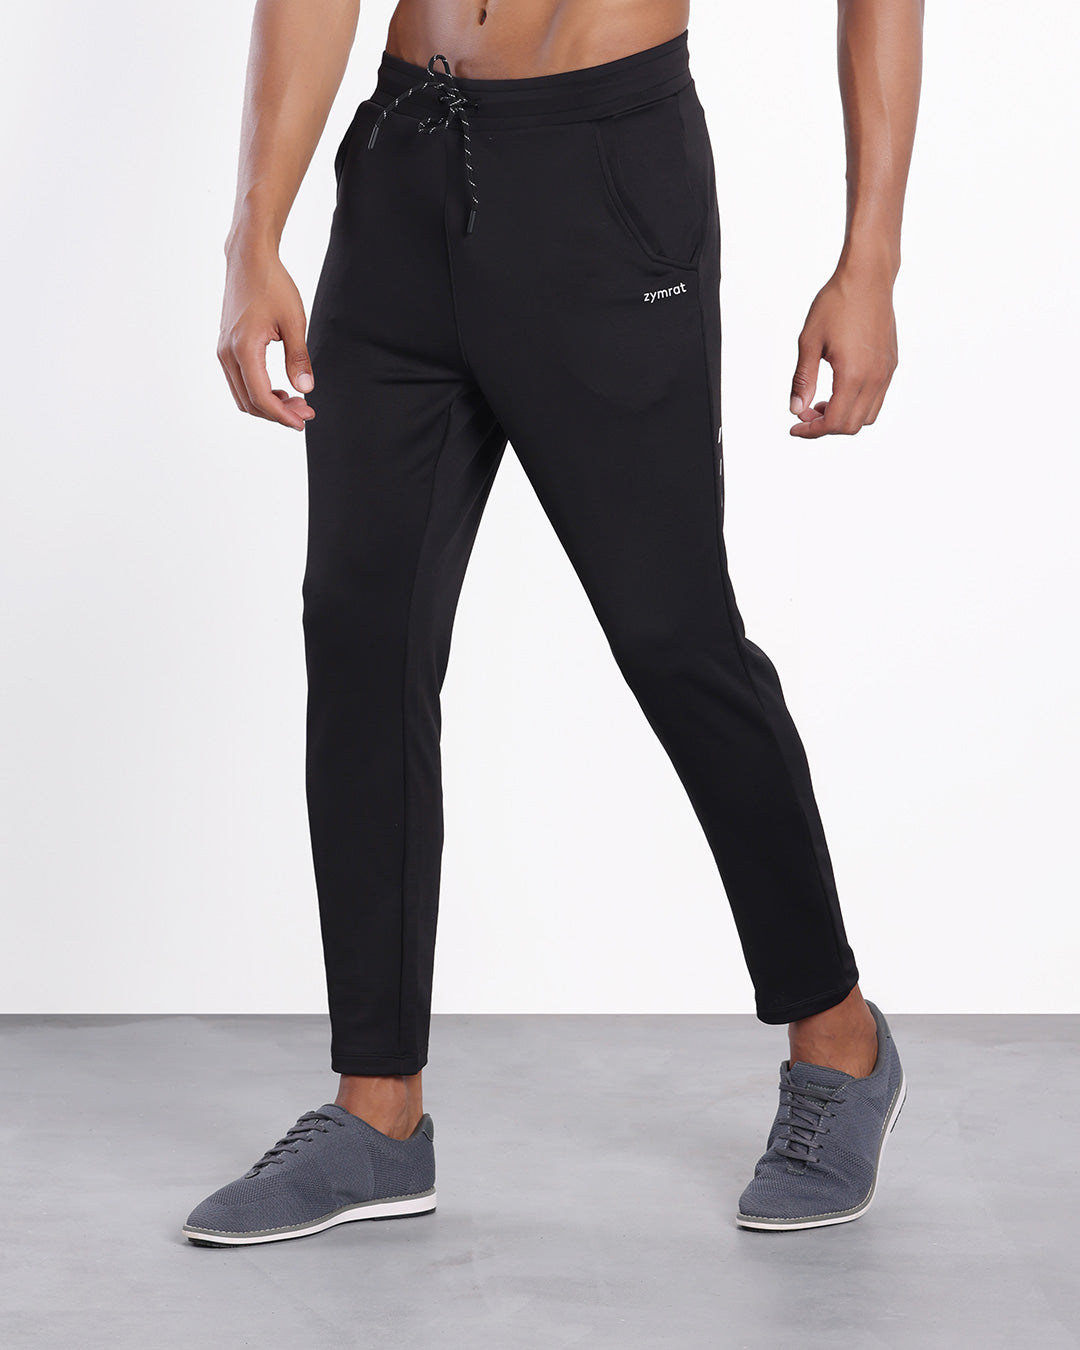 Black Jogger for running, gym, walking, yoga with anti microbial and  moisture wicking properties – Zymrat